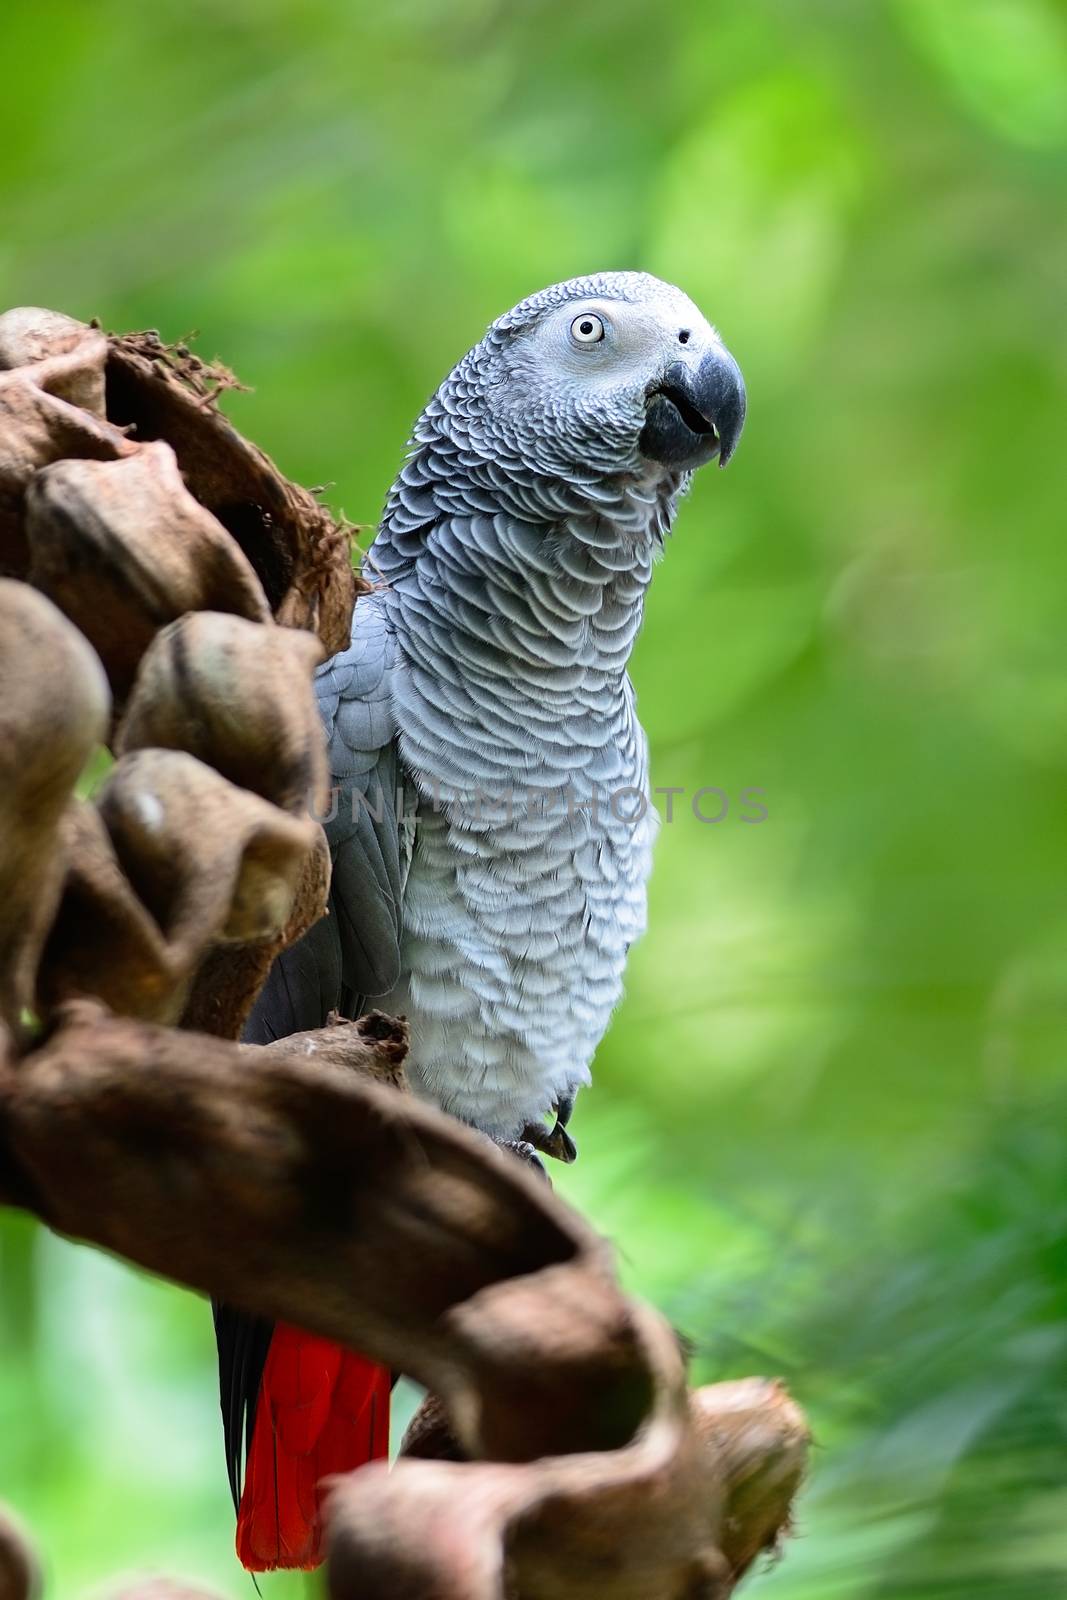 Beautiful grey parrot, African Grey Parrot (Psittacus erithacus), standing on a branch